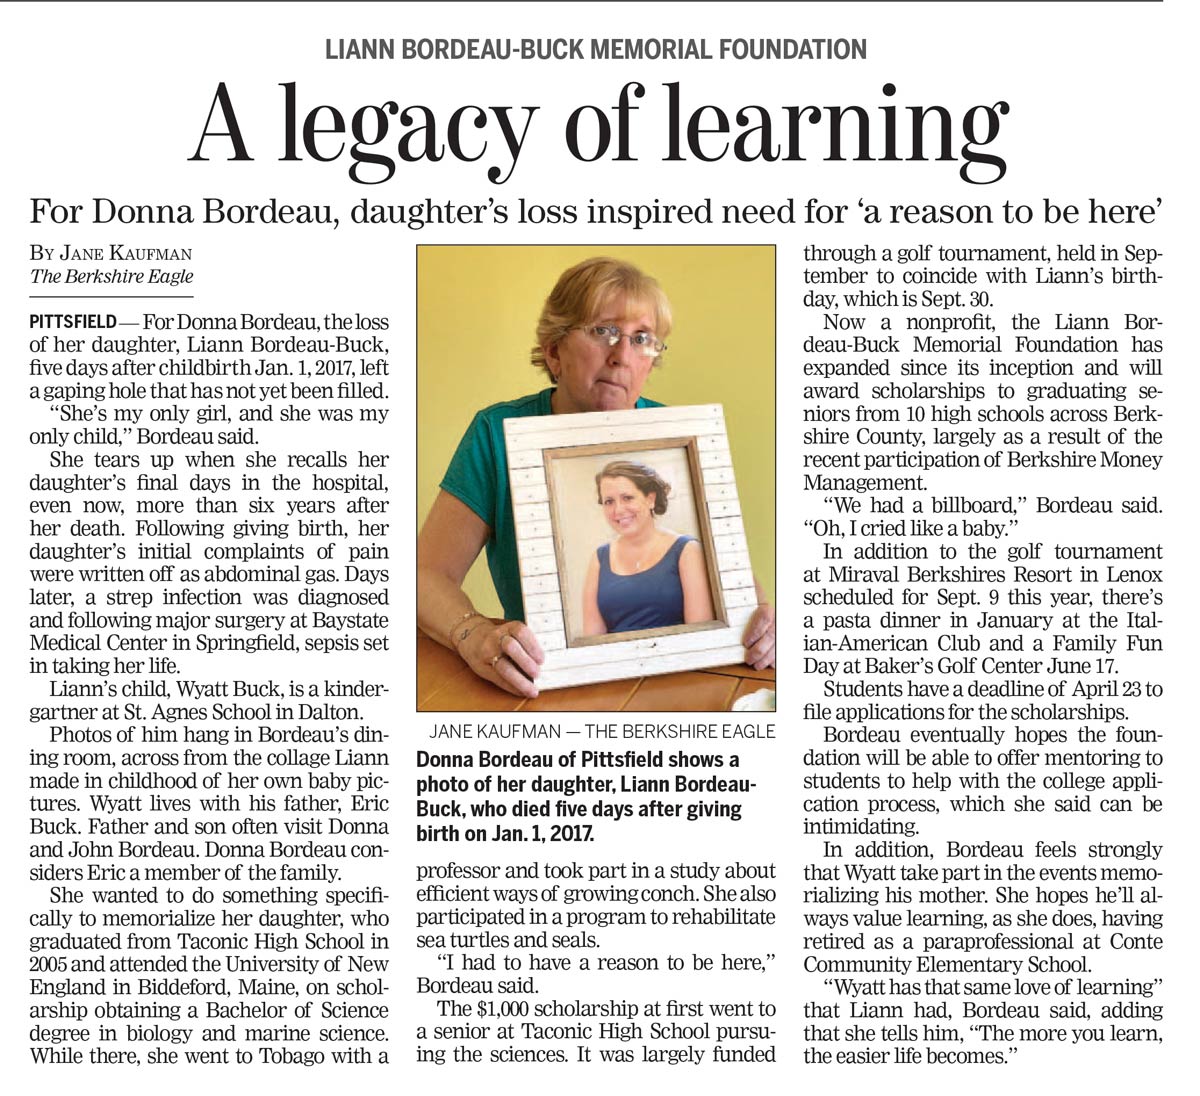 A legacy of learning